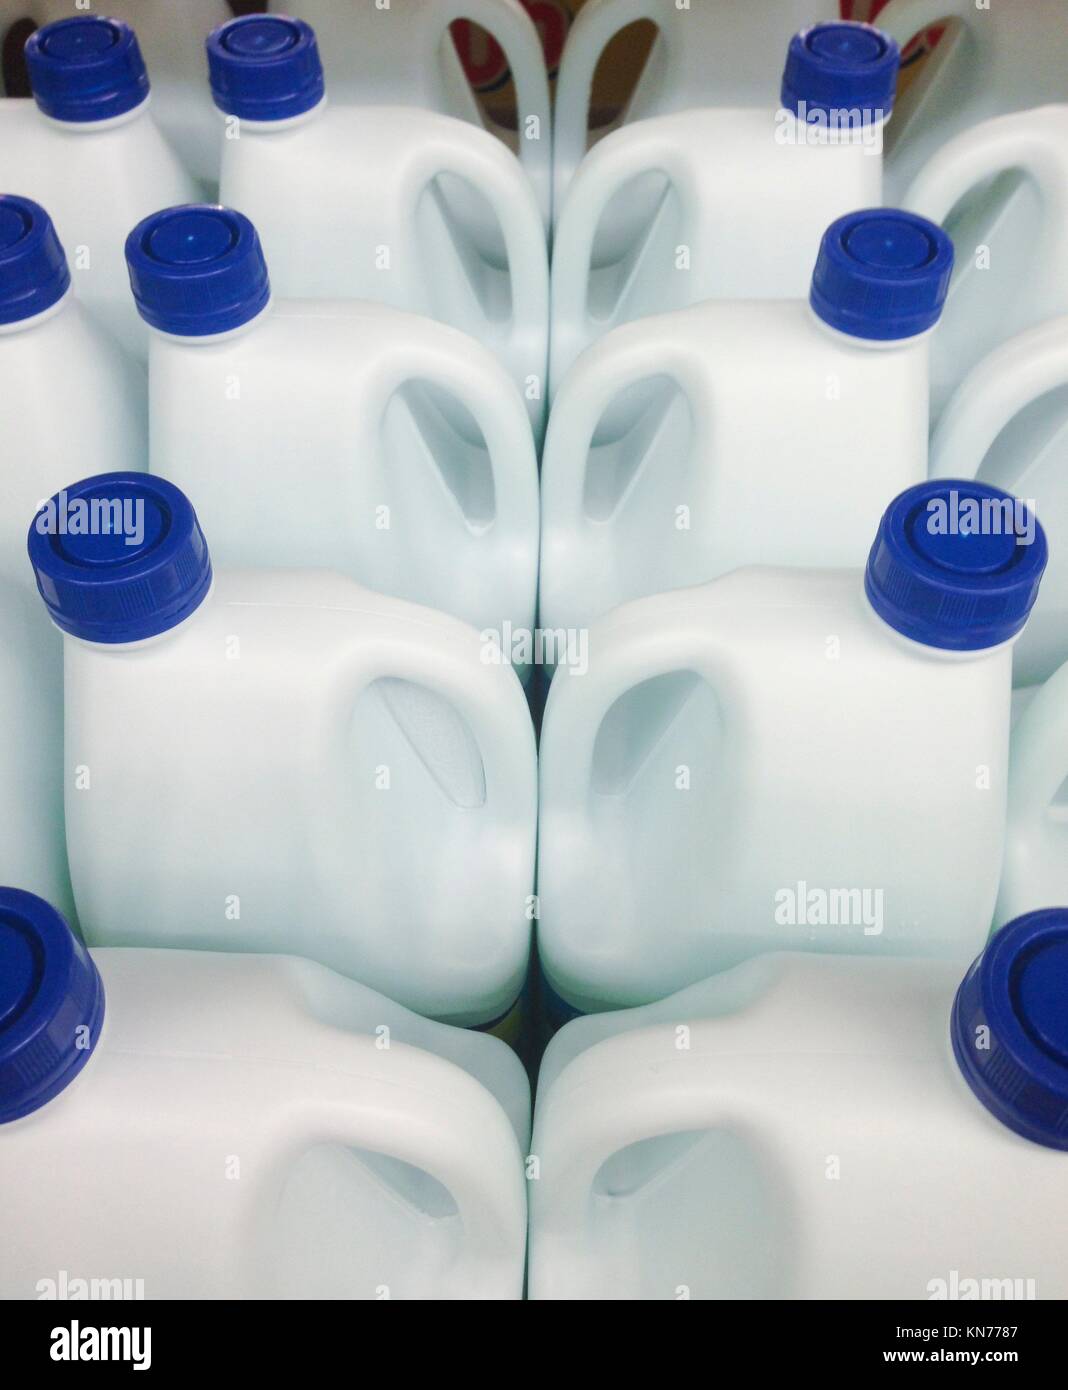 Photo of several bleach white bottles on sale in a supermarket. Stock Photo